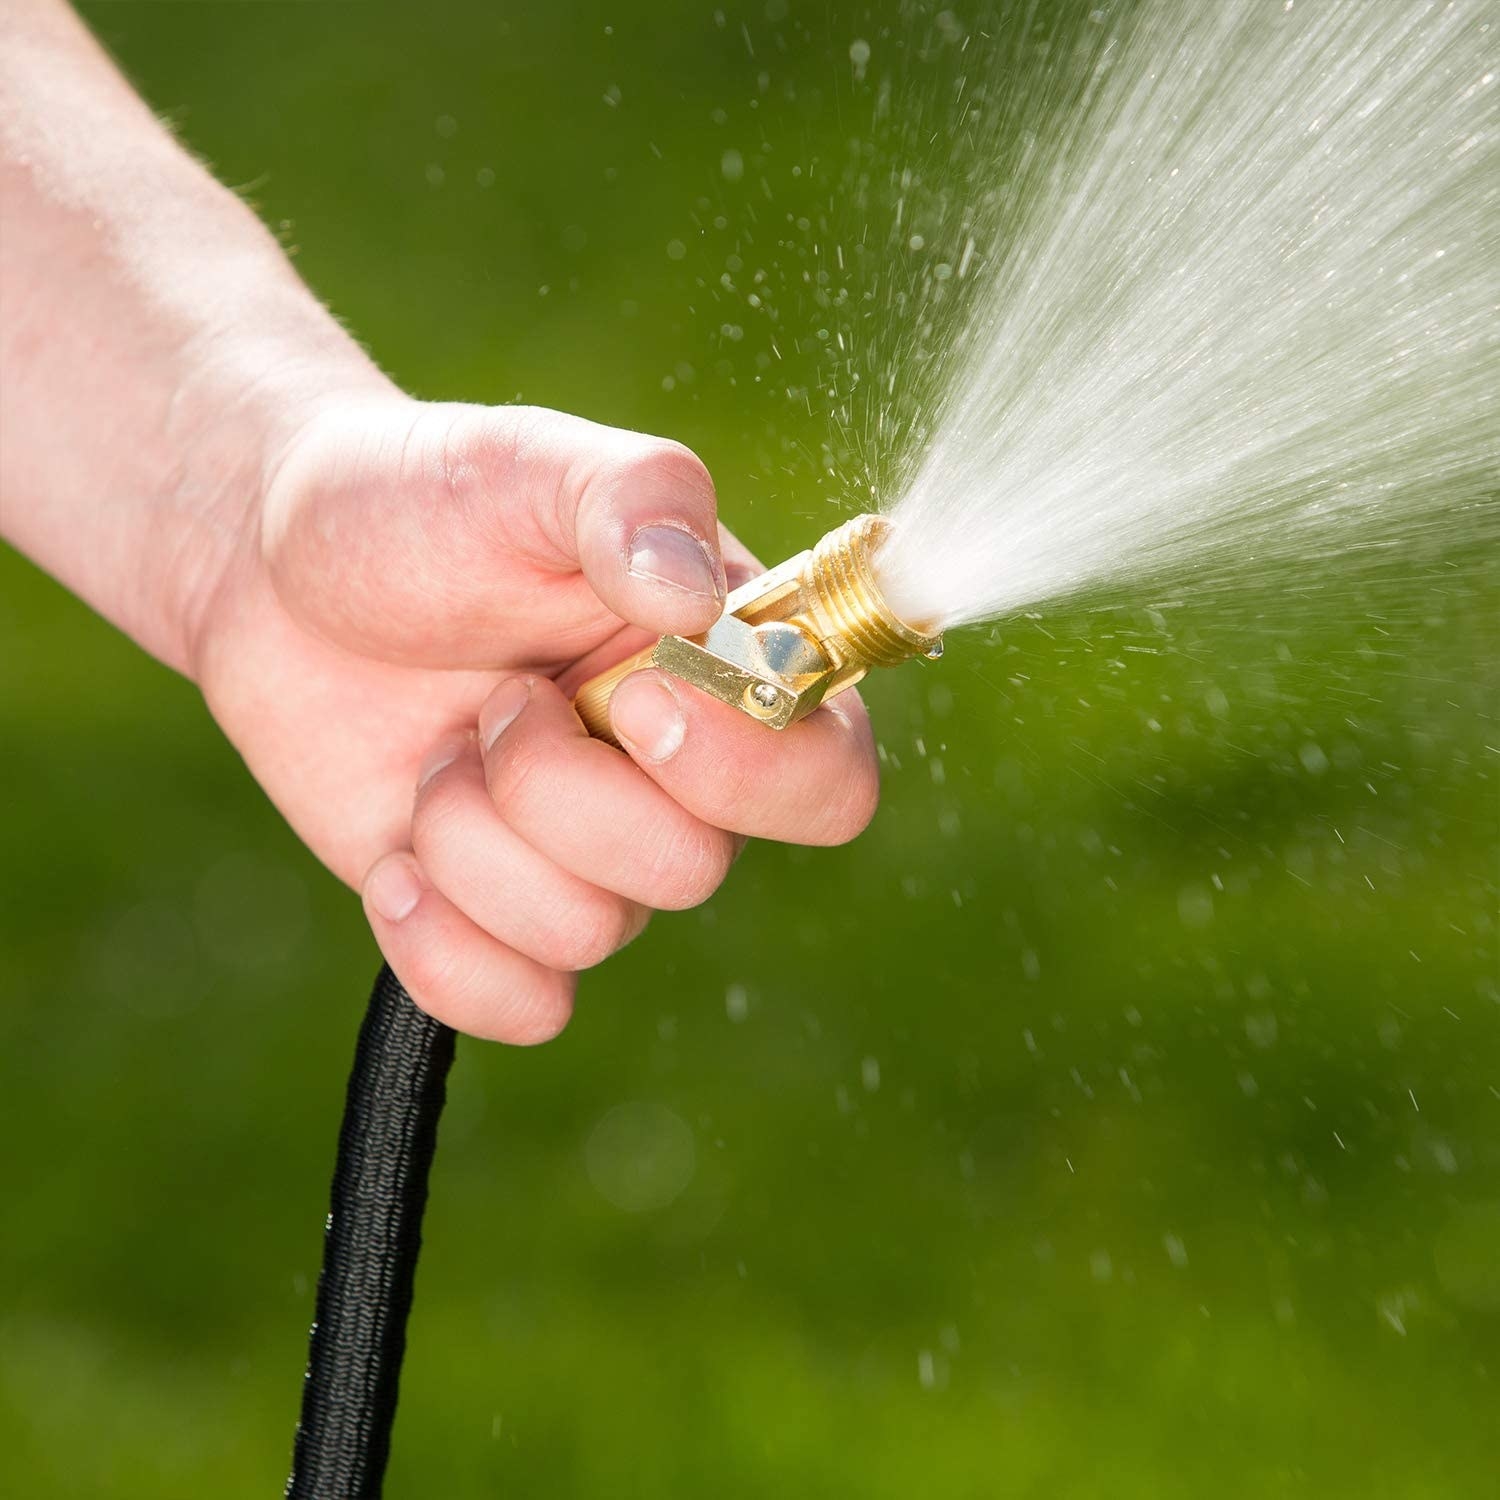 person holding the hose with water coming out of it